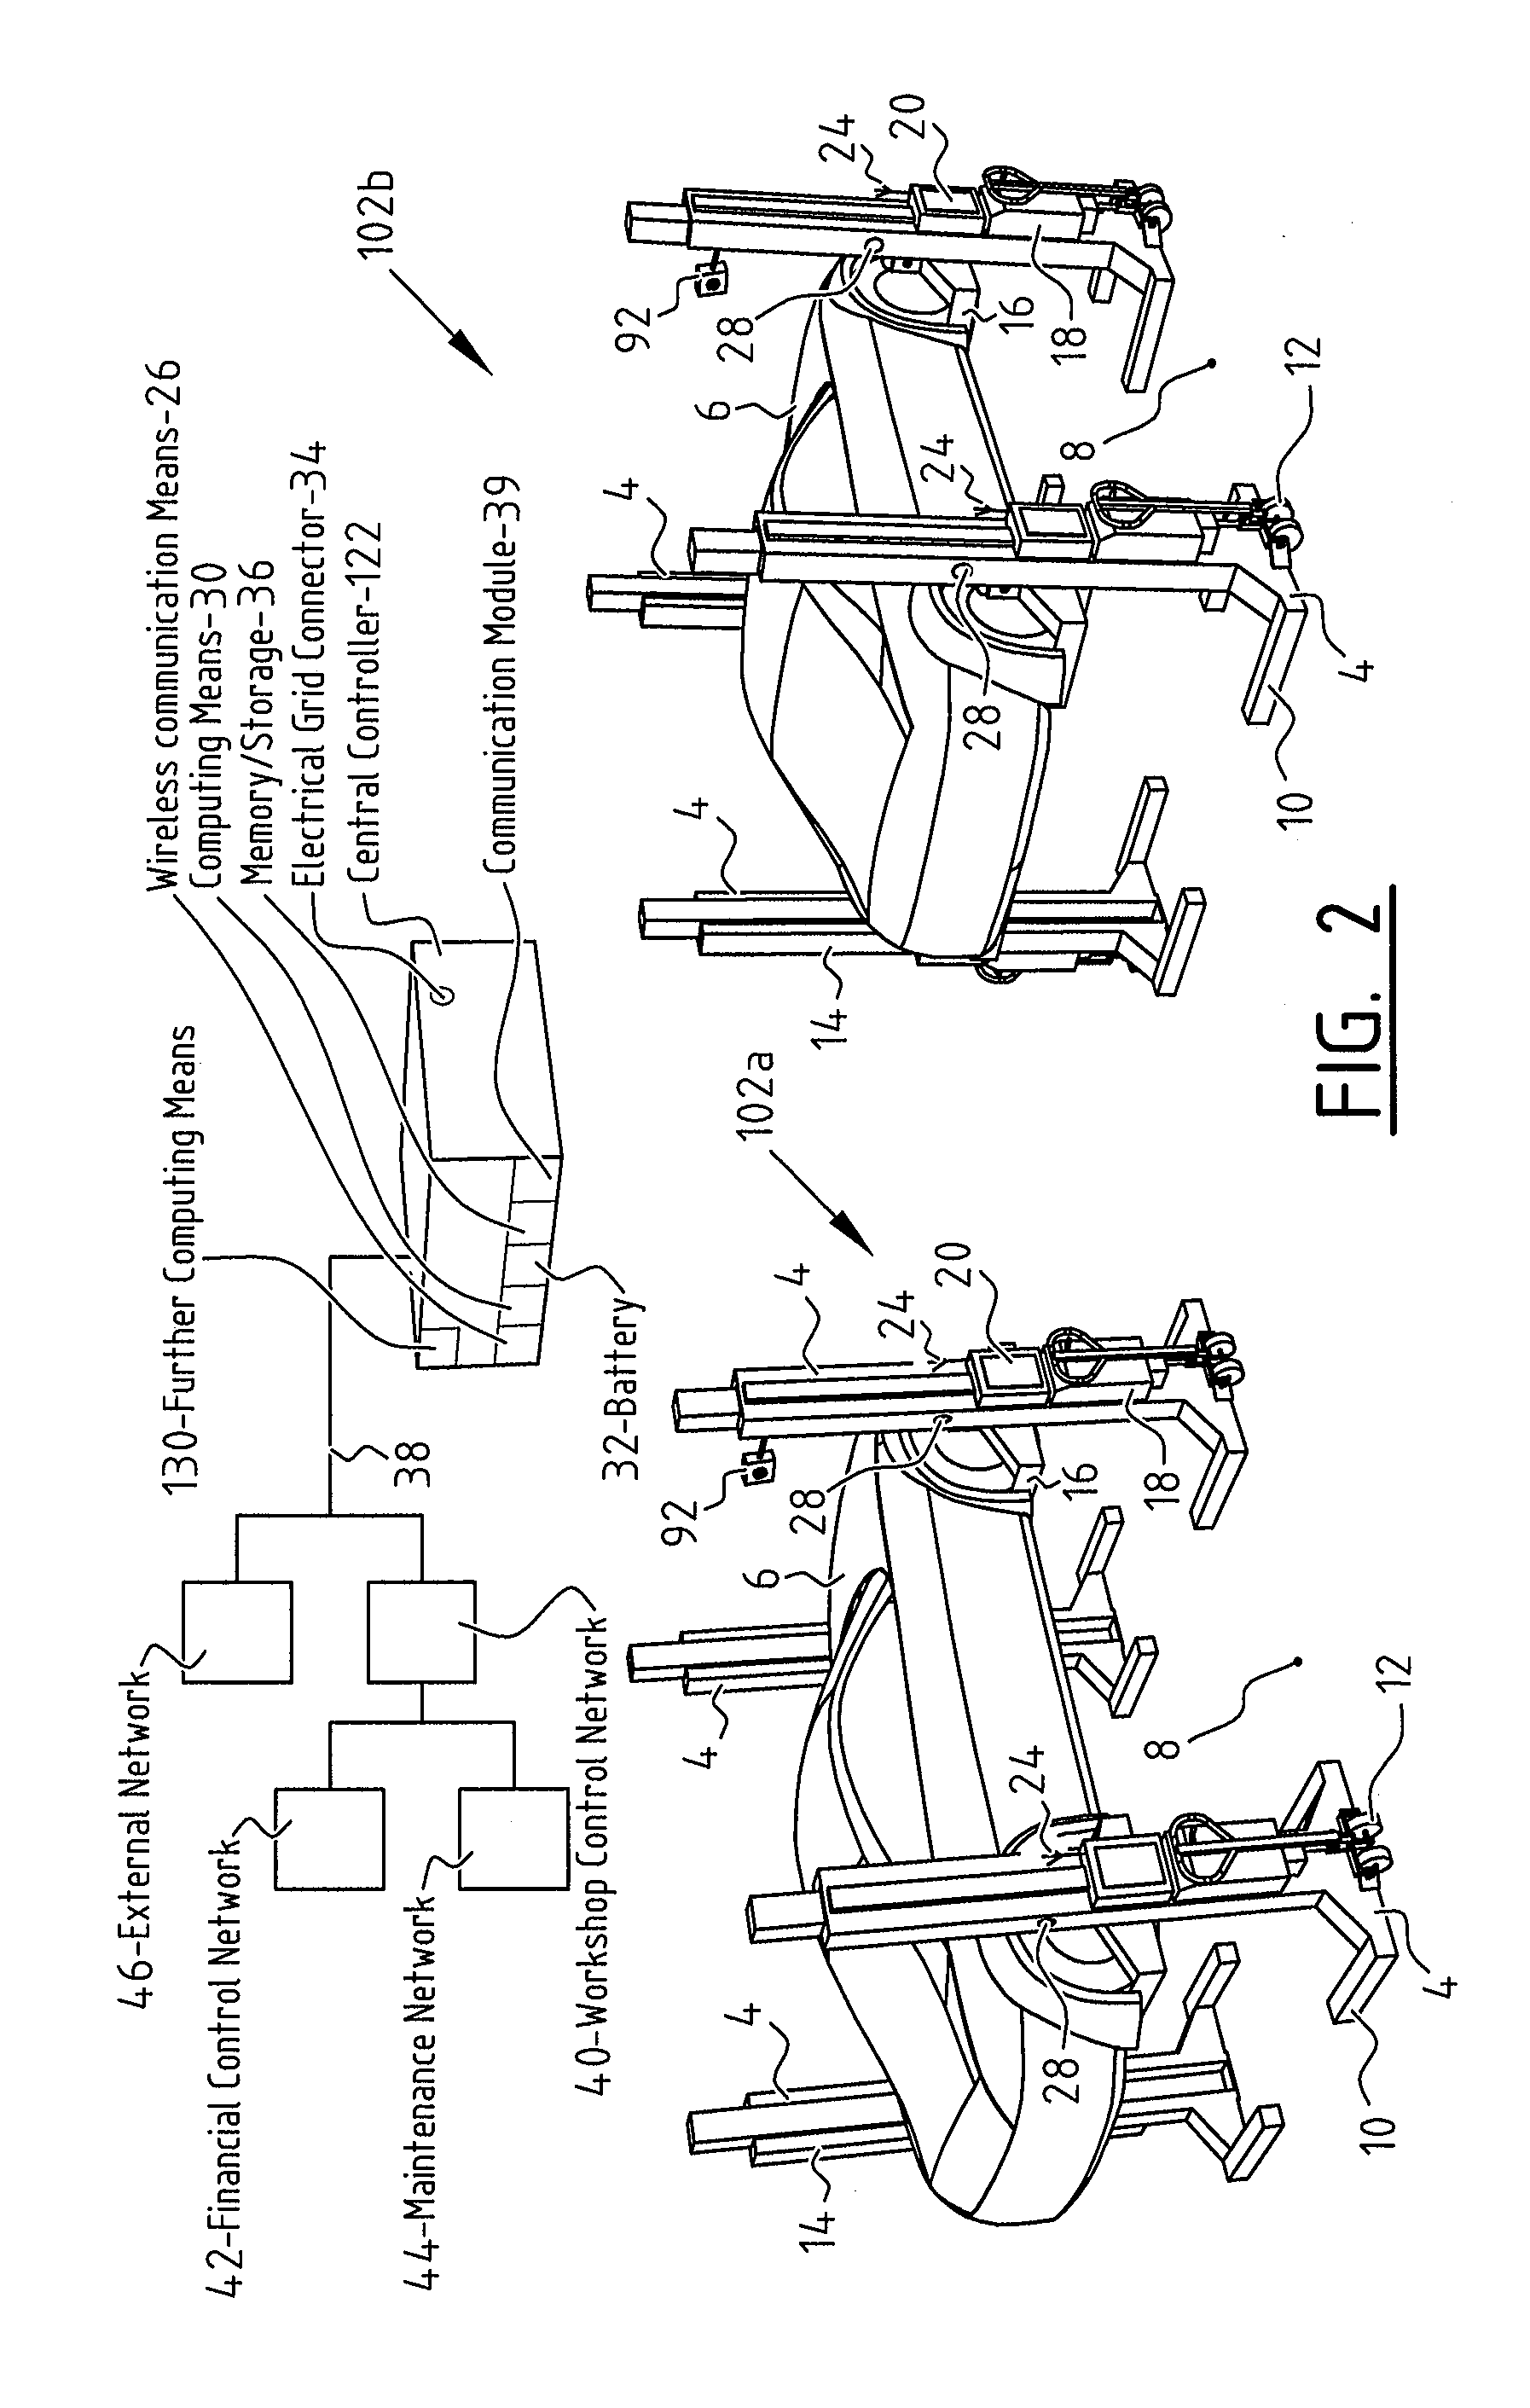 Lifting System with Central Controller for Lifting a Vehicle with Moveable Lifting Columns, and Method Therefor